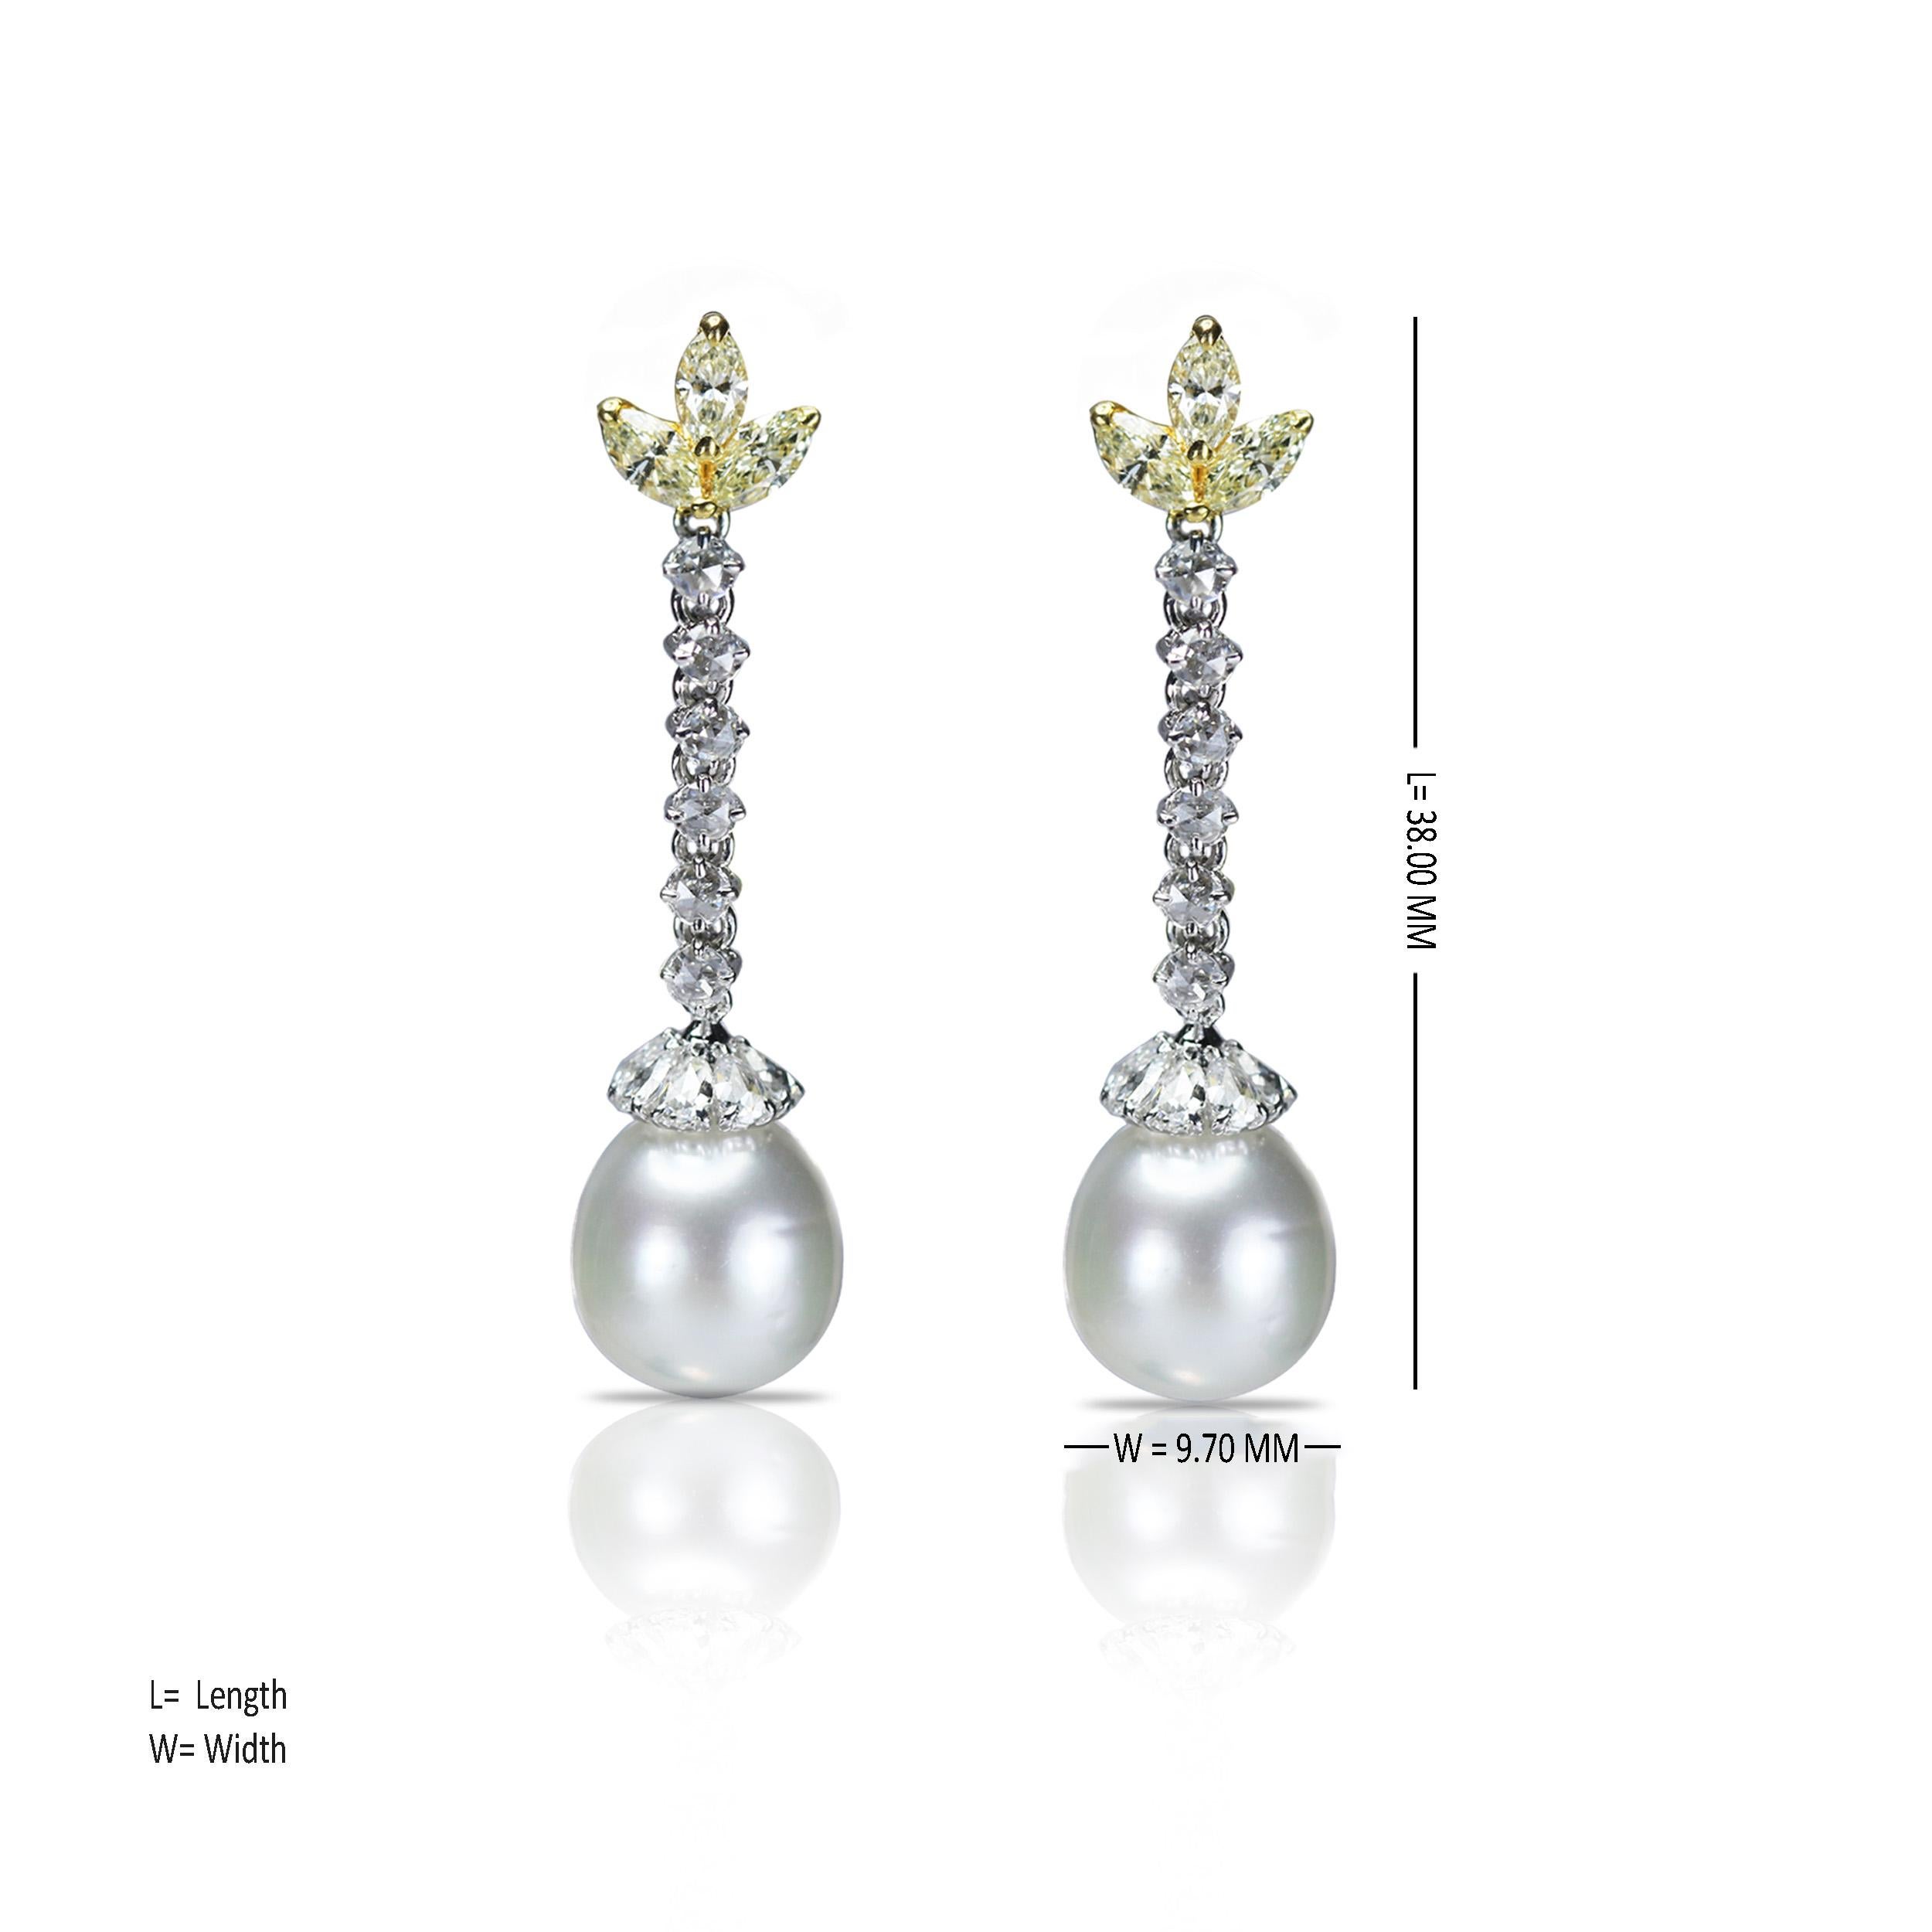 Studio Rêves Rose cut Diamonds and South Sea Pearls Earrings in 18 Karat Gold In New Condition For Sale In Mumbai, Maharashtra